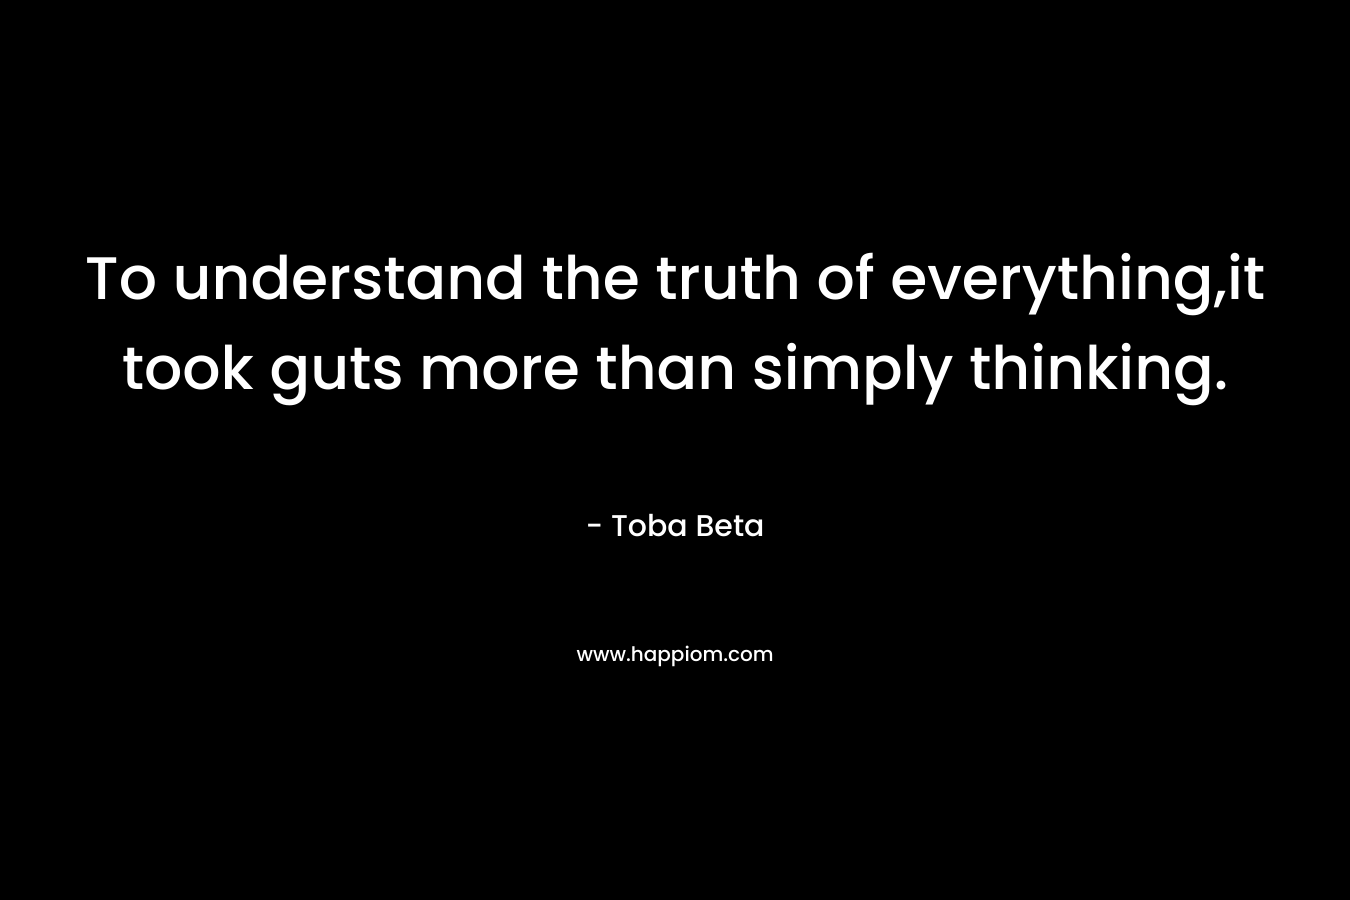 To understand the truth of everything,it took guts more than simply thinking. – Toba Beta